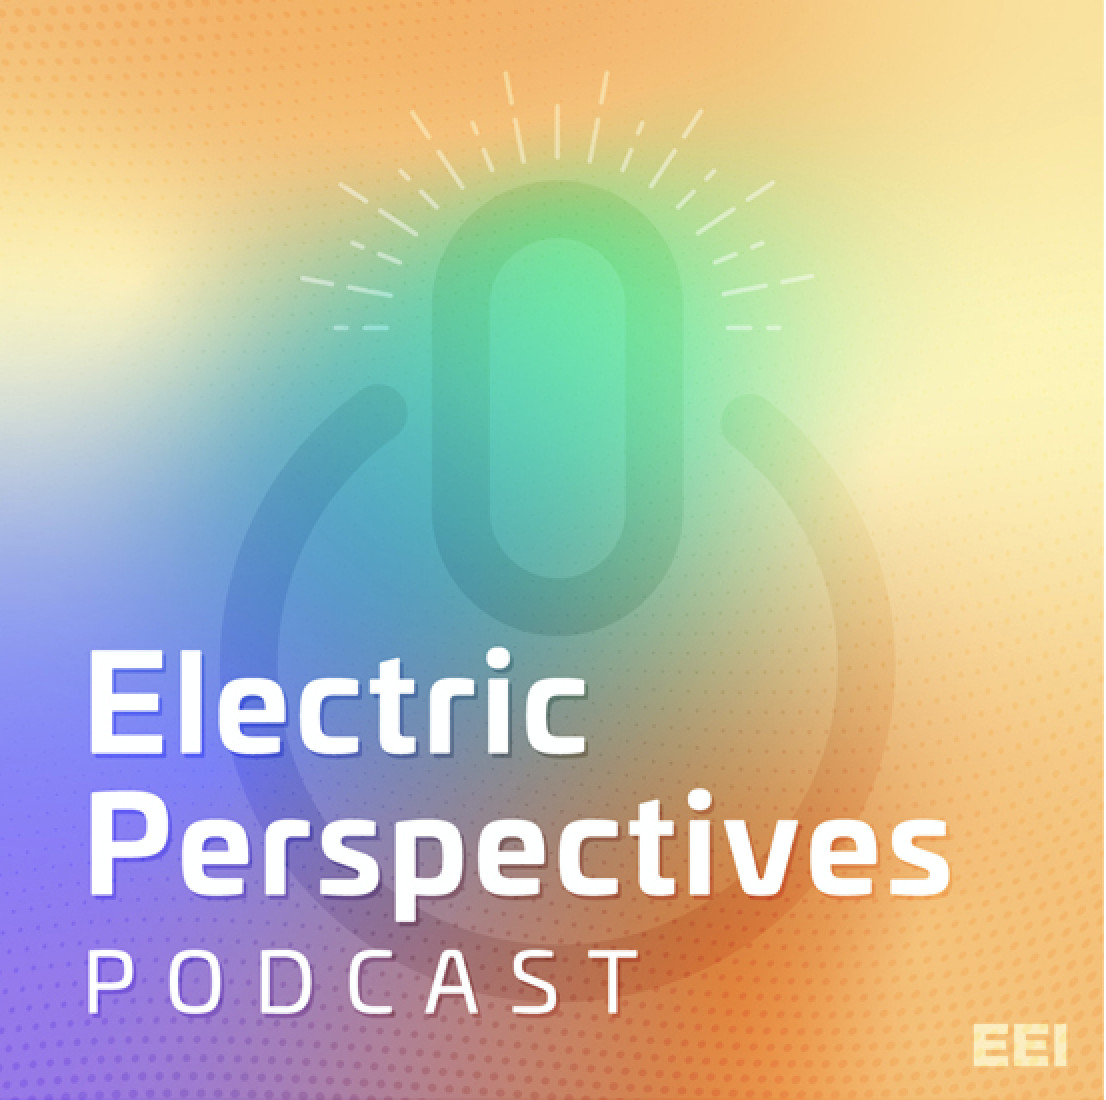 Electric Perspectives